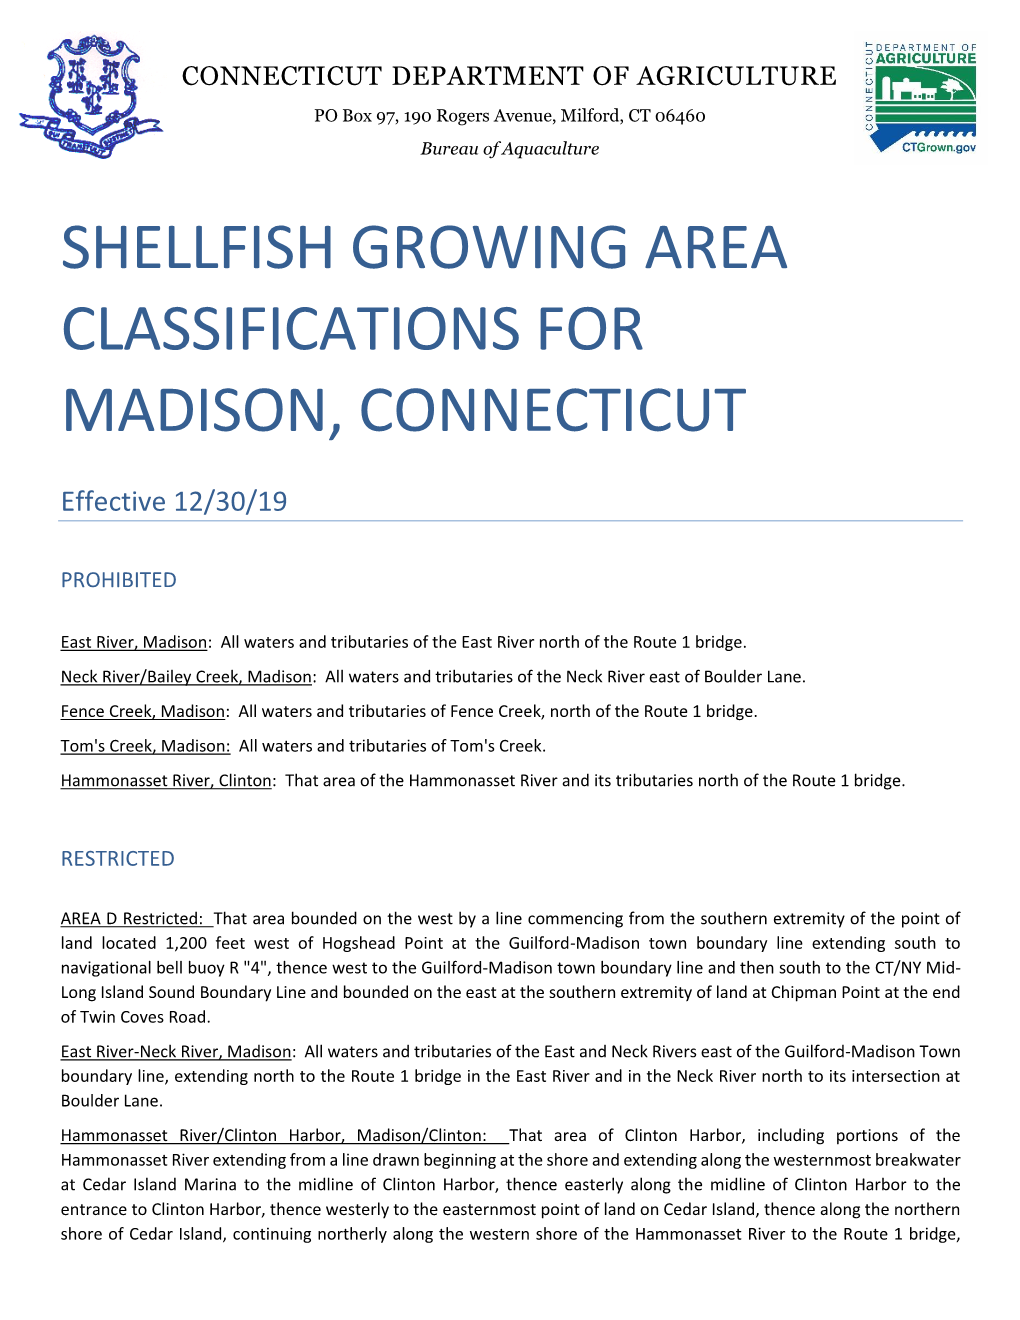 Shellfish Growing Area Classifications for Madison, Connecticut